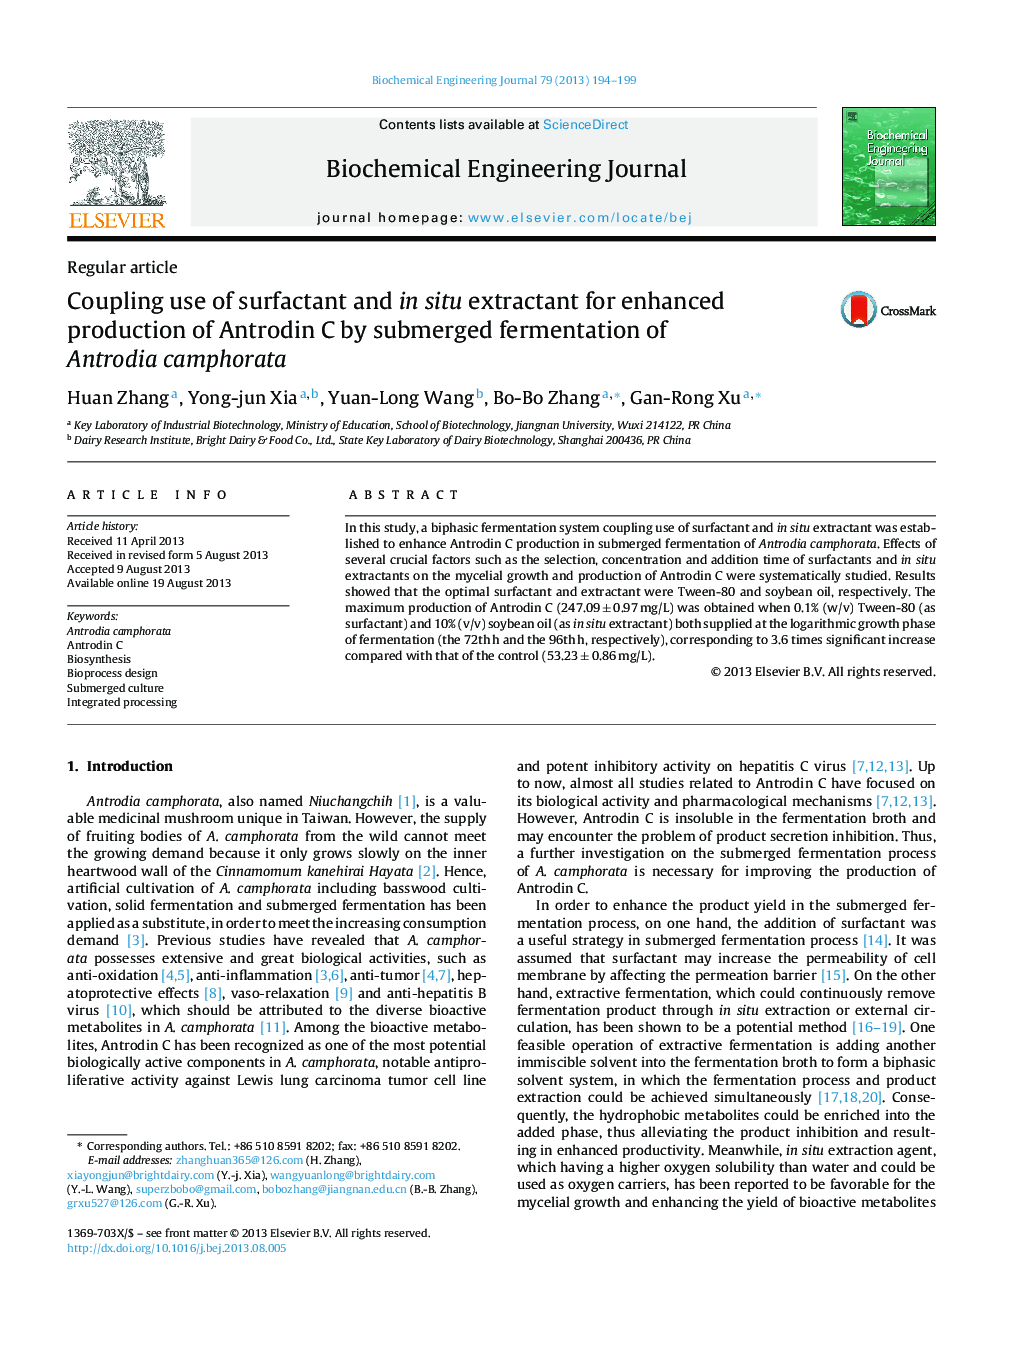 Coupling use of surfactant and in situ extractant for enhanced production of Antrodin C by submerged fermentation of Antrodia camphorata